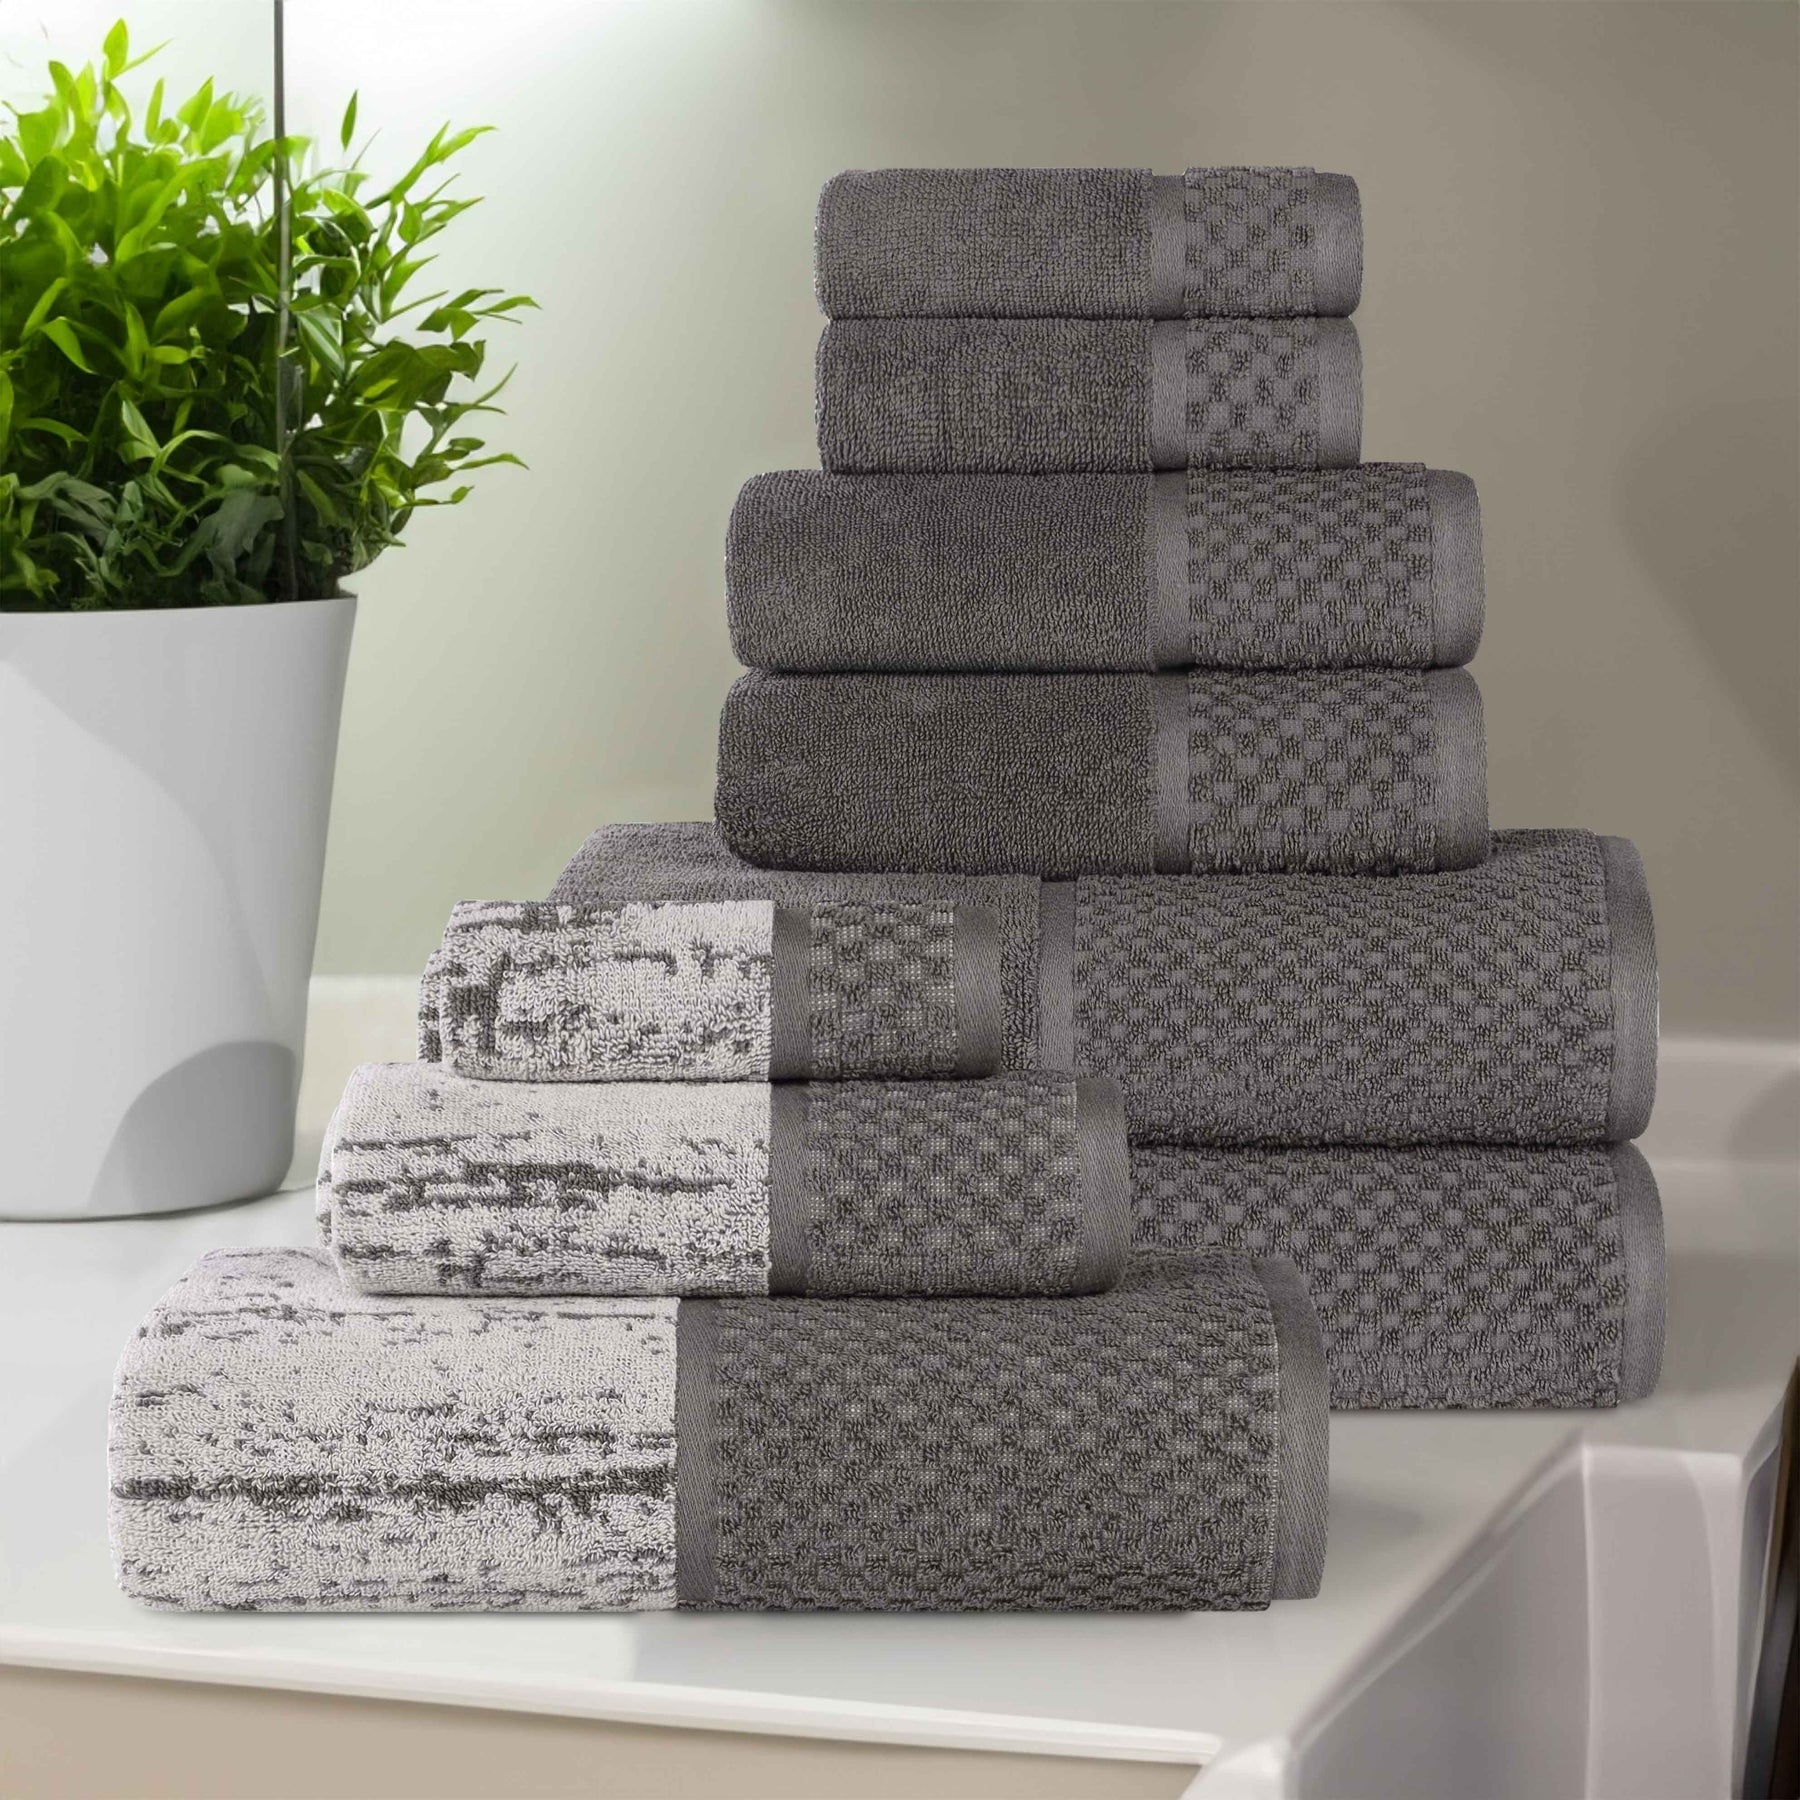 Lodie Cotton Jacquard Solid and Two-Toned 9 Piece Assorted Towel Set - Charcoal-Silver